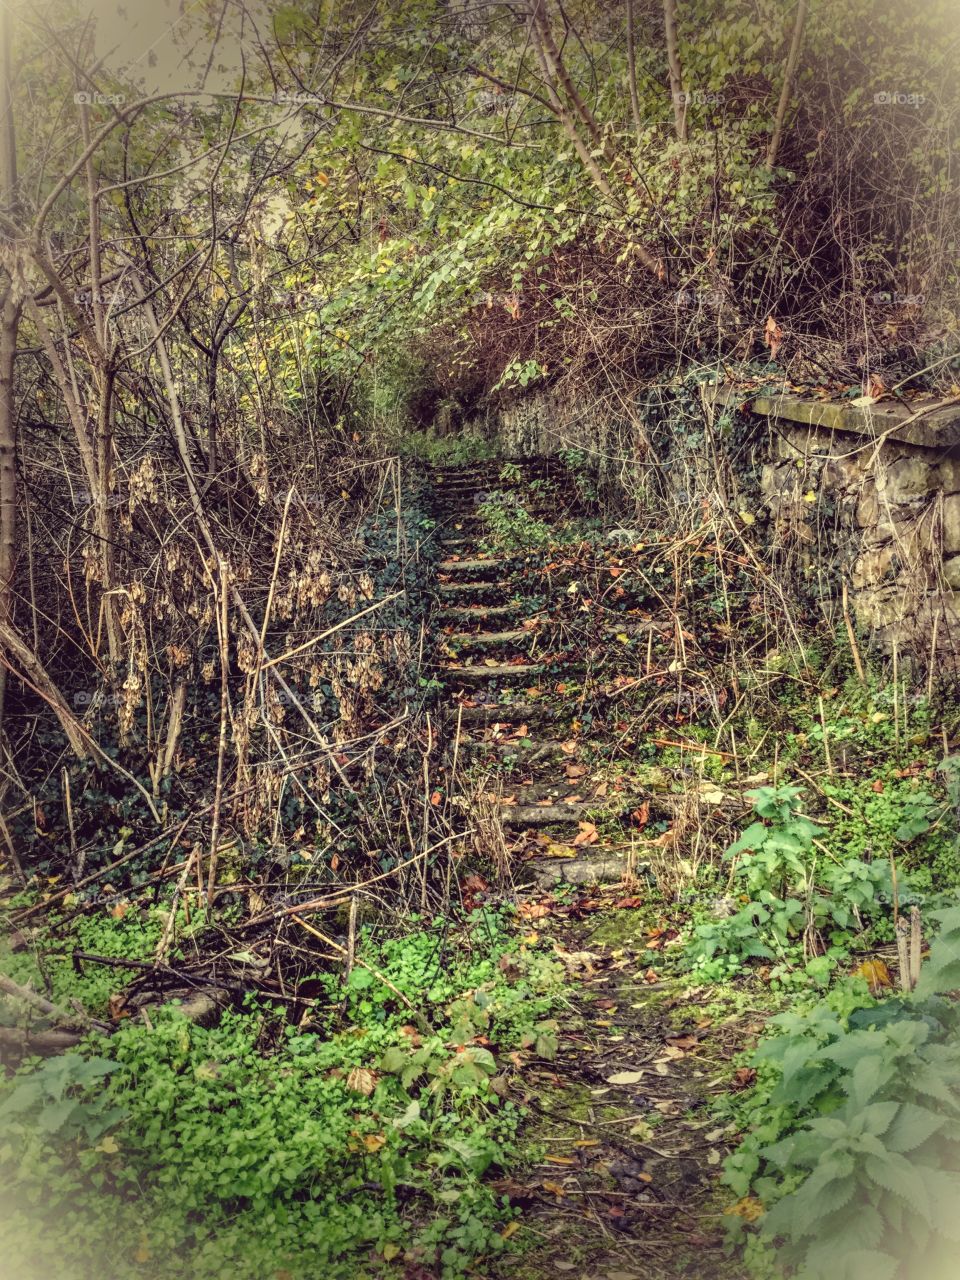 The hidden stairs in the forest